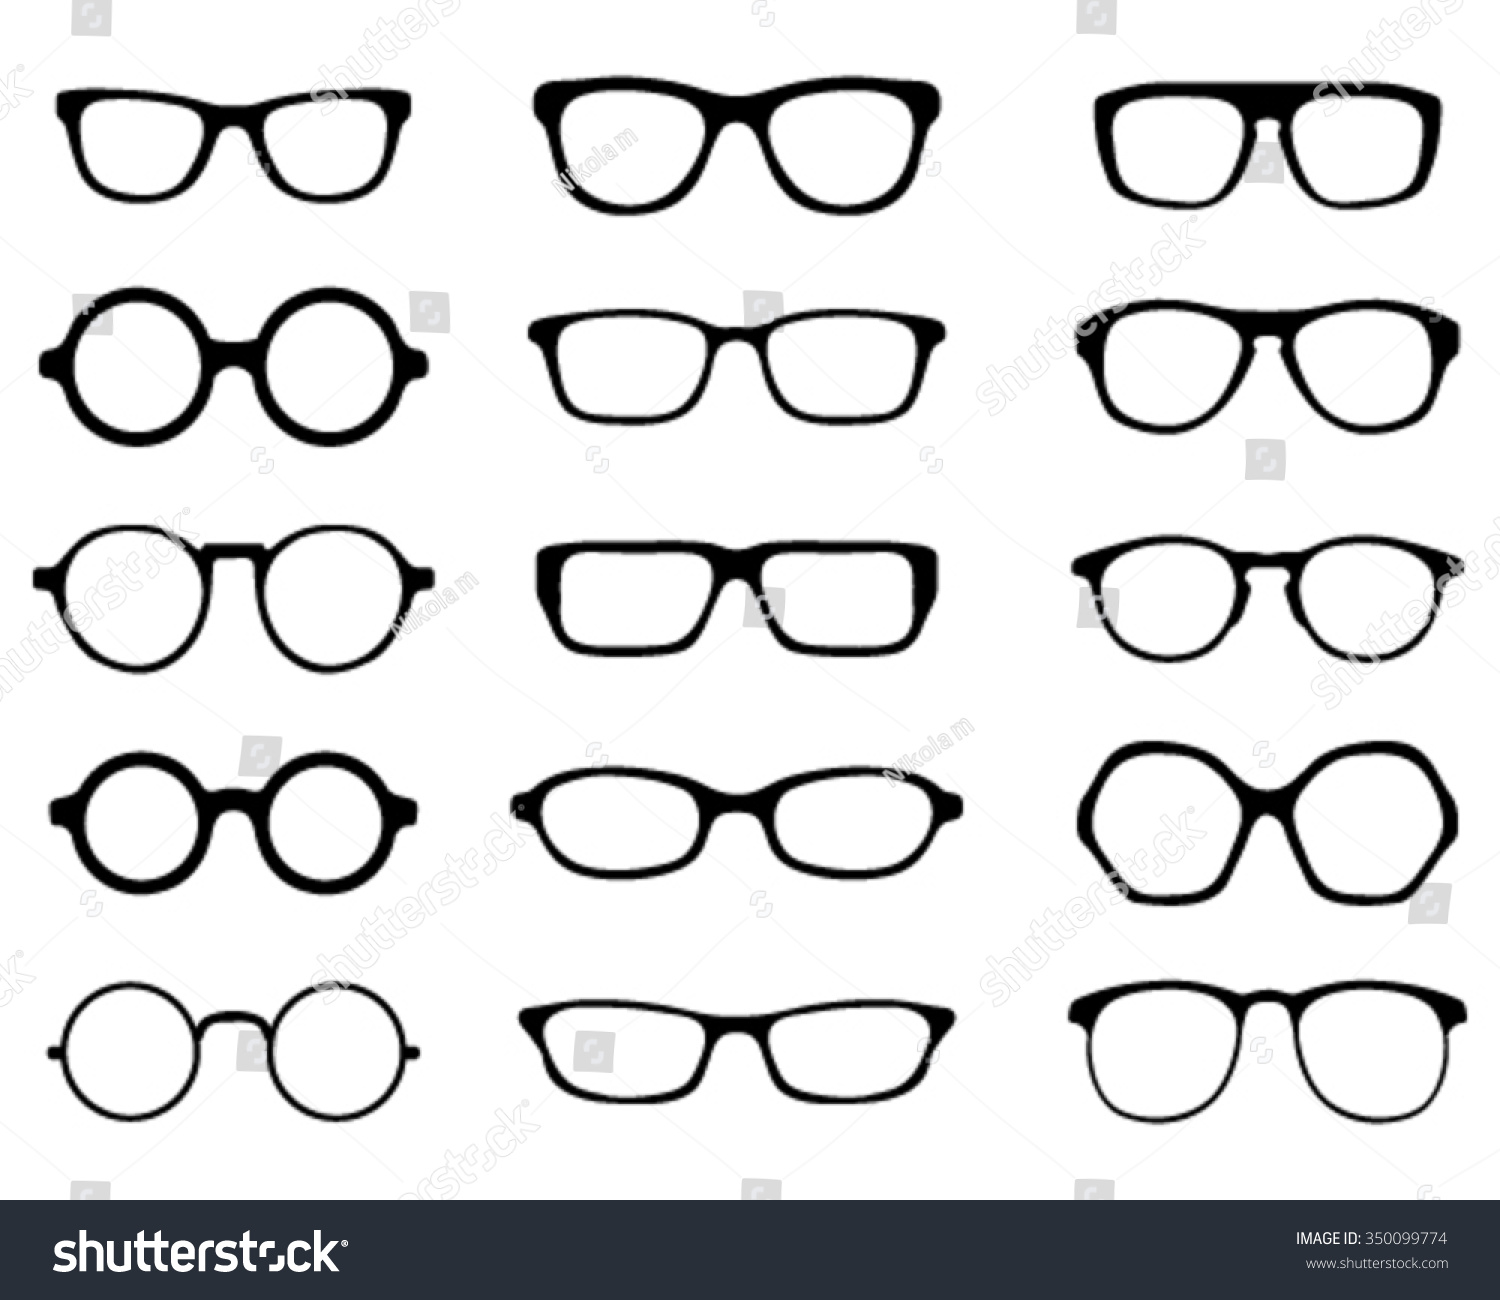 Black Silhouettes Different Eyeglasses Vector Stock Vector Royalty Free 350099774 Shutterstock